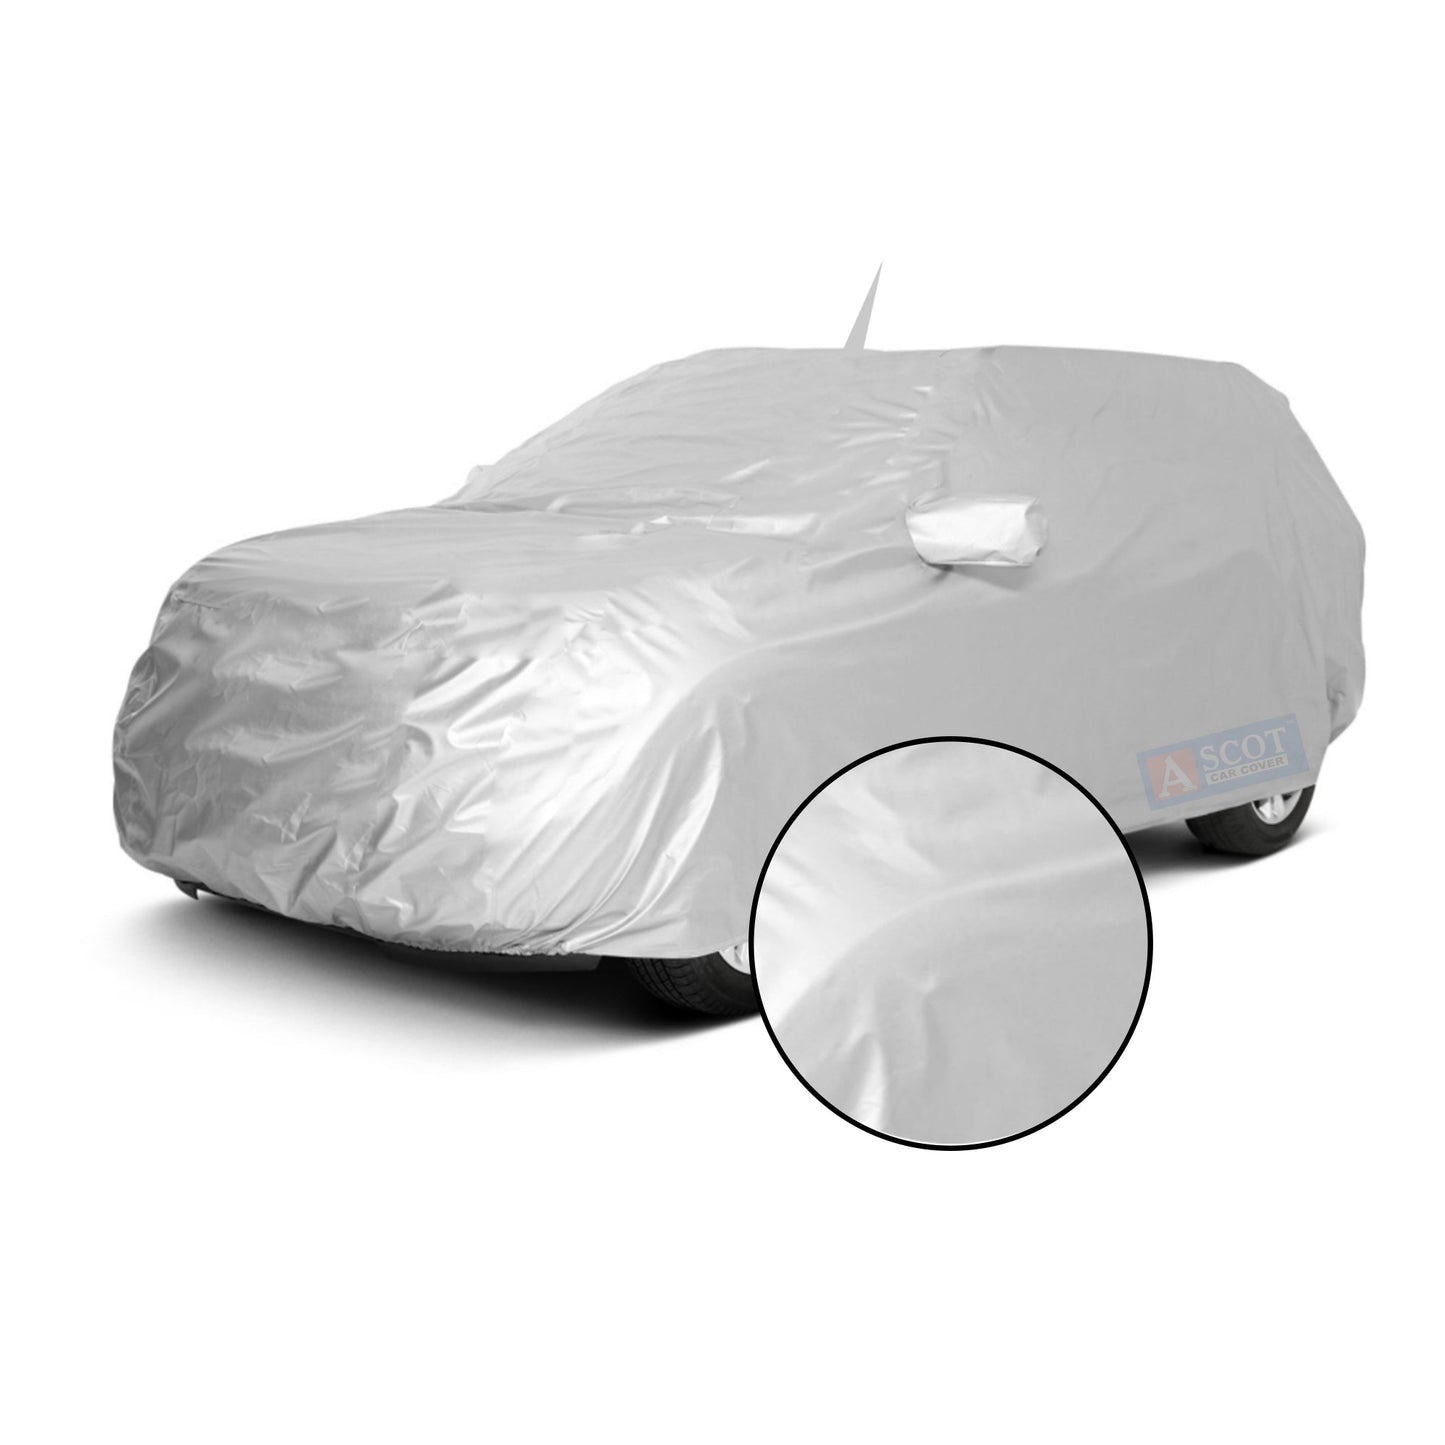 Ascot BMW 6 Series Gran Turismo 2017-2023 Model Car Body Cover Dust Proof, Trippel Stitched